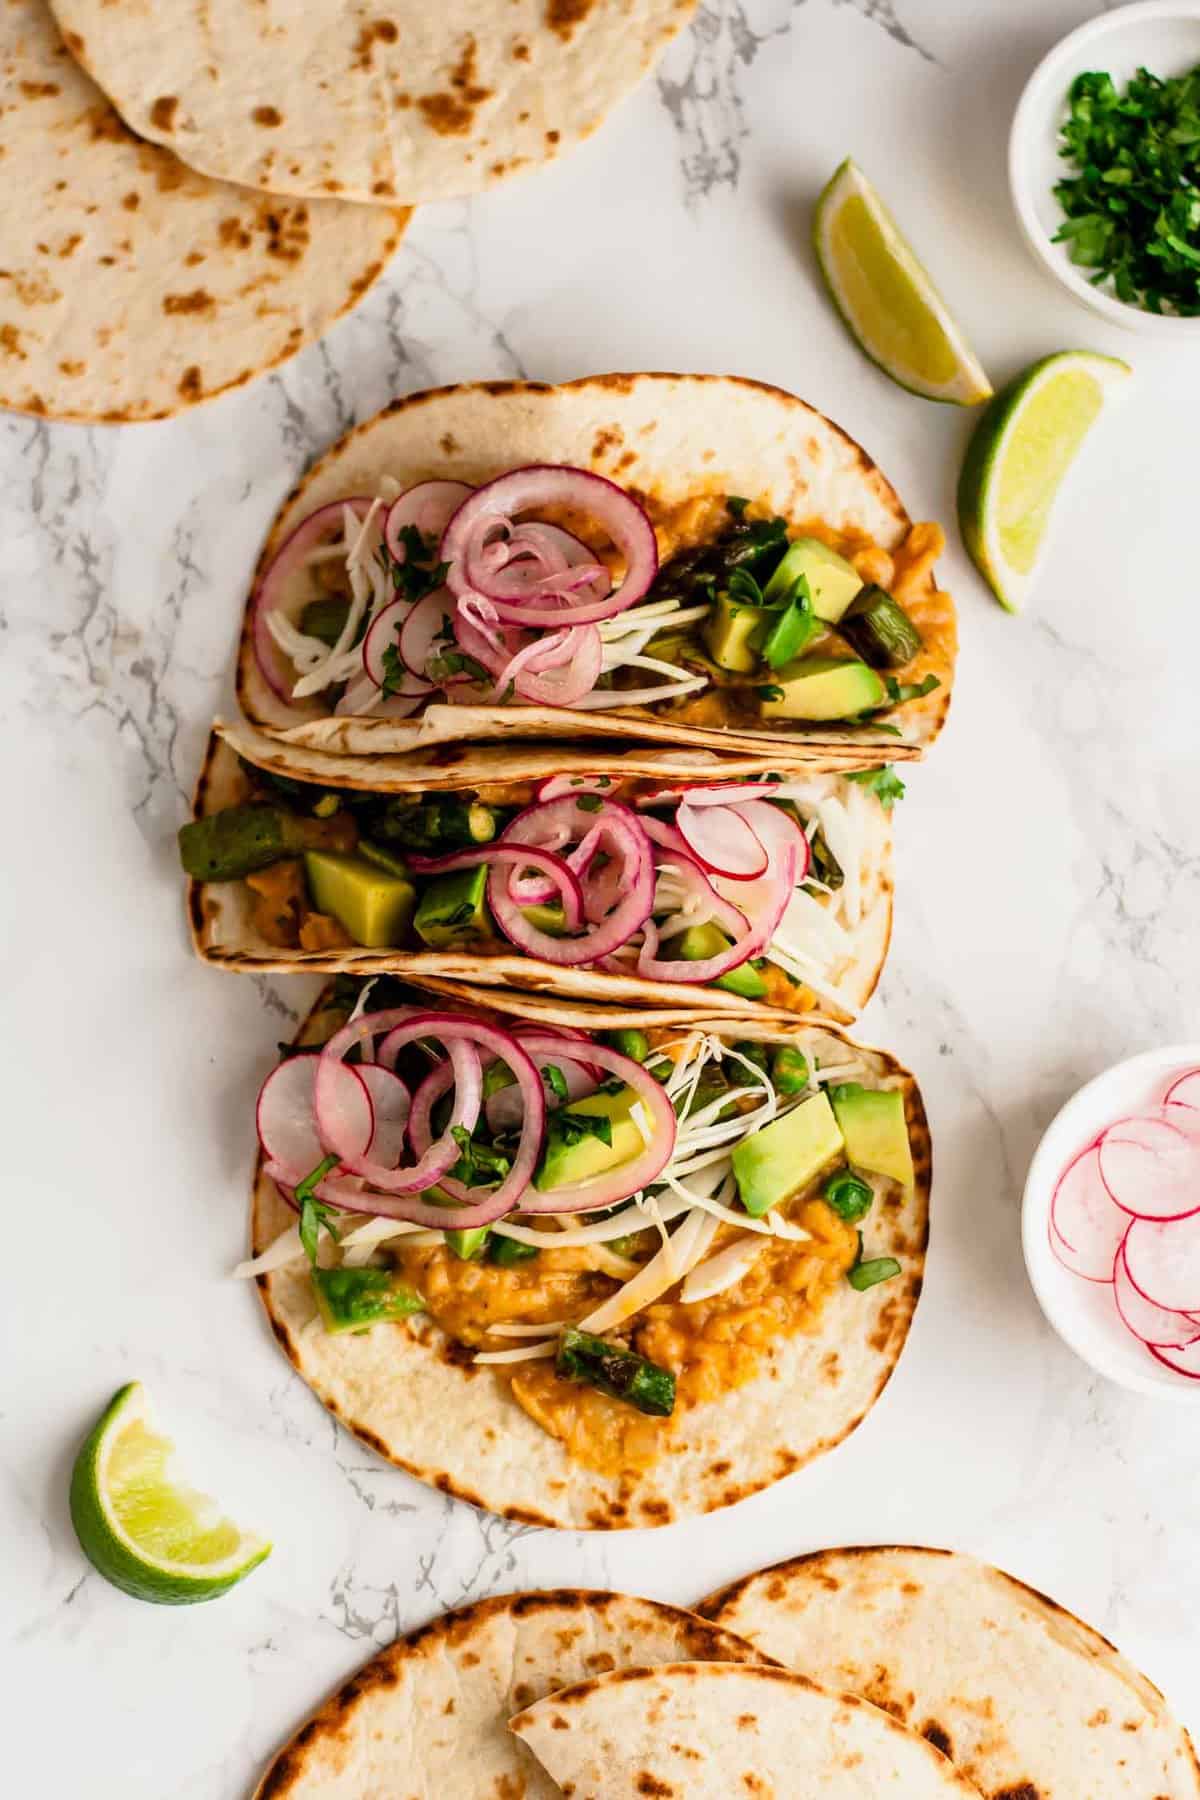 Vegan Tacos with Refried Cannellini Beans and Asparagus